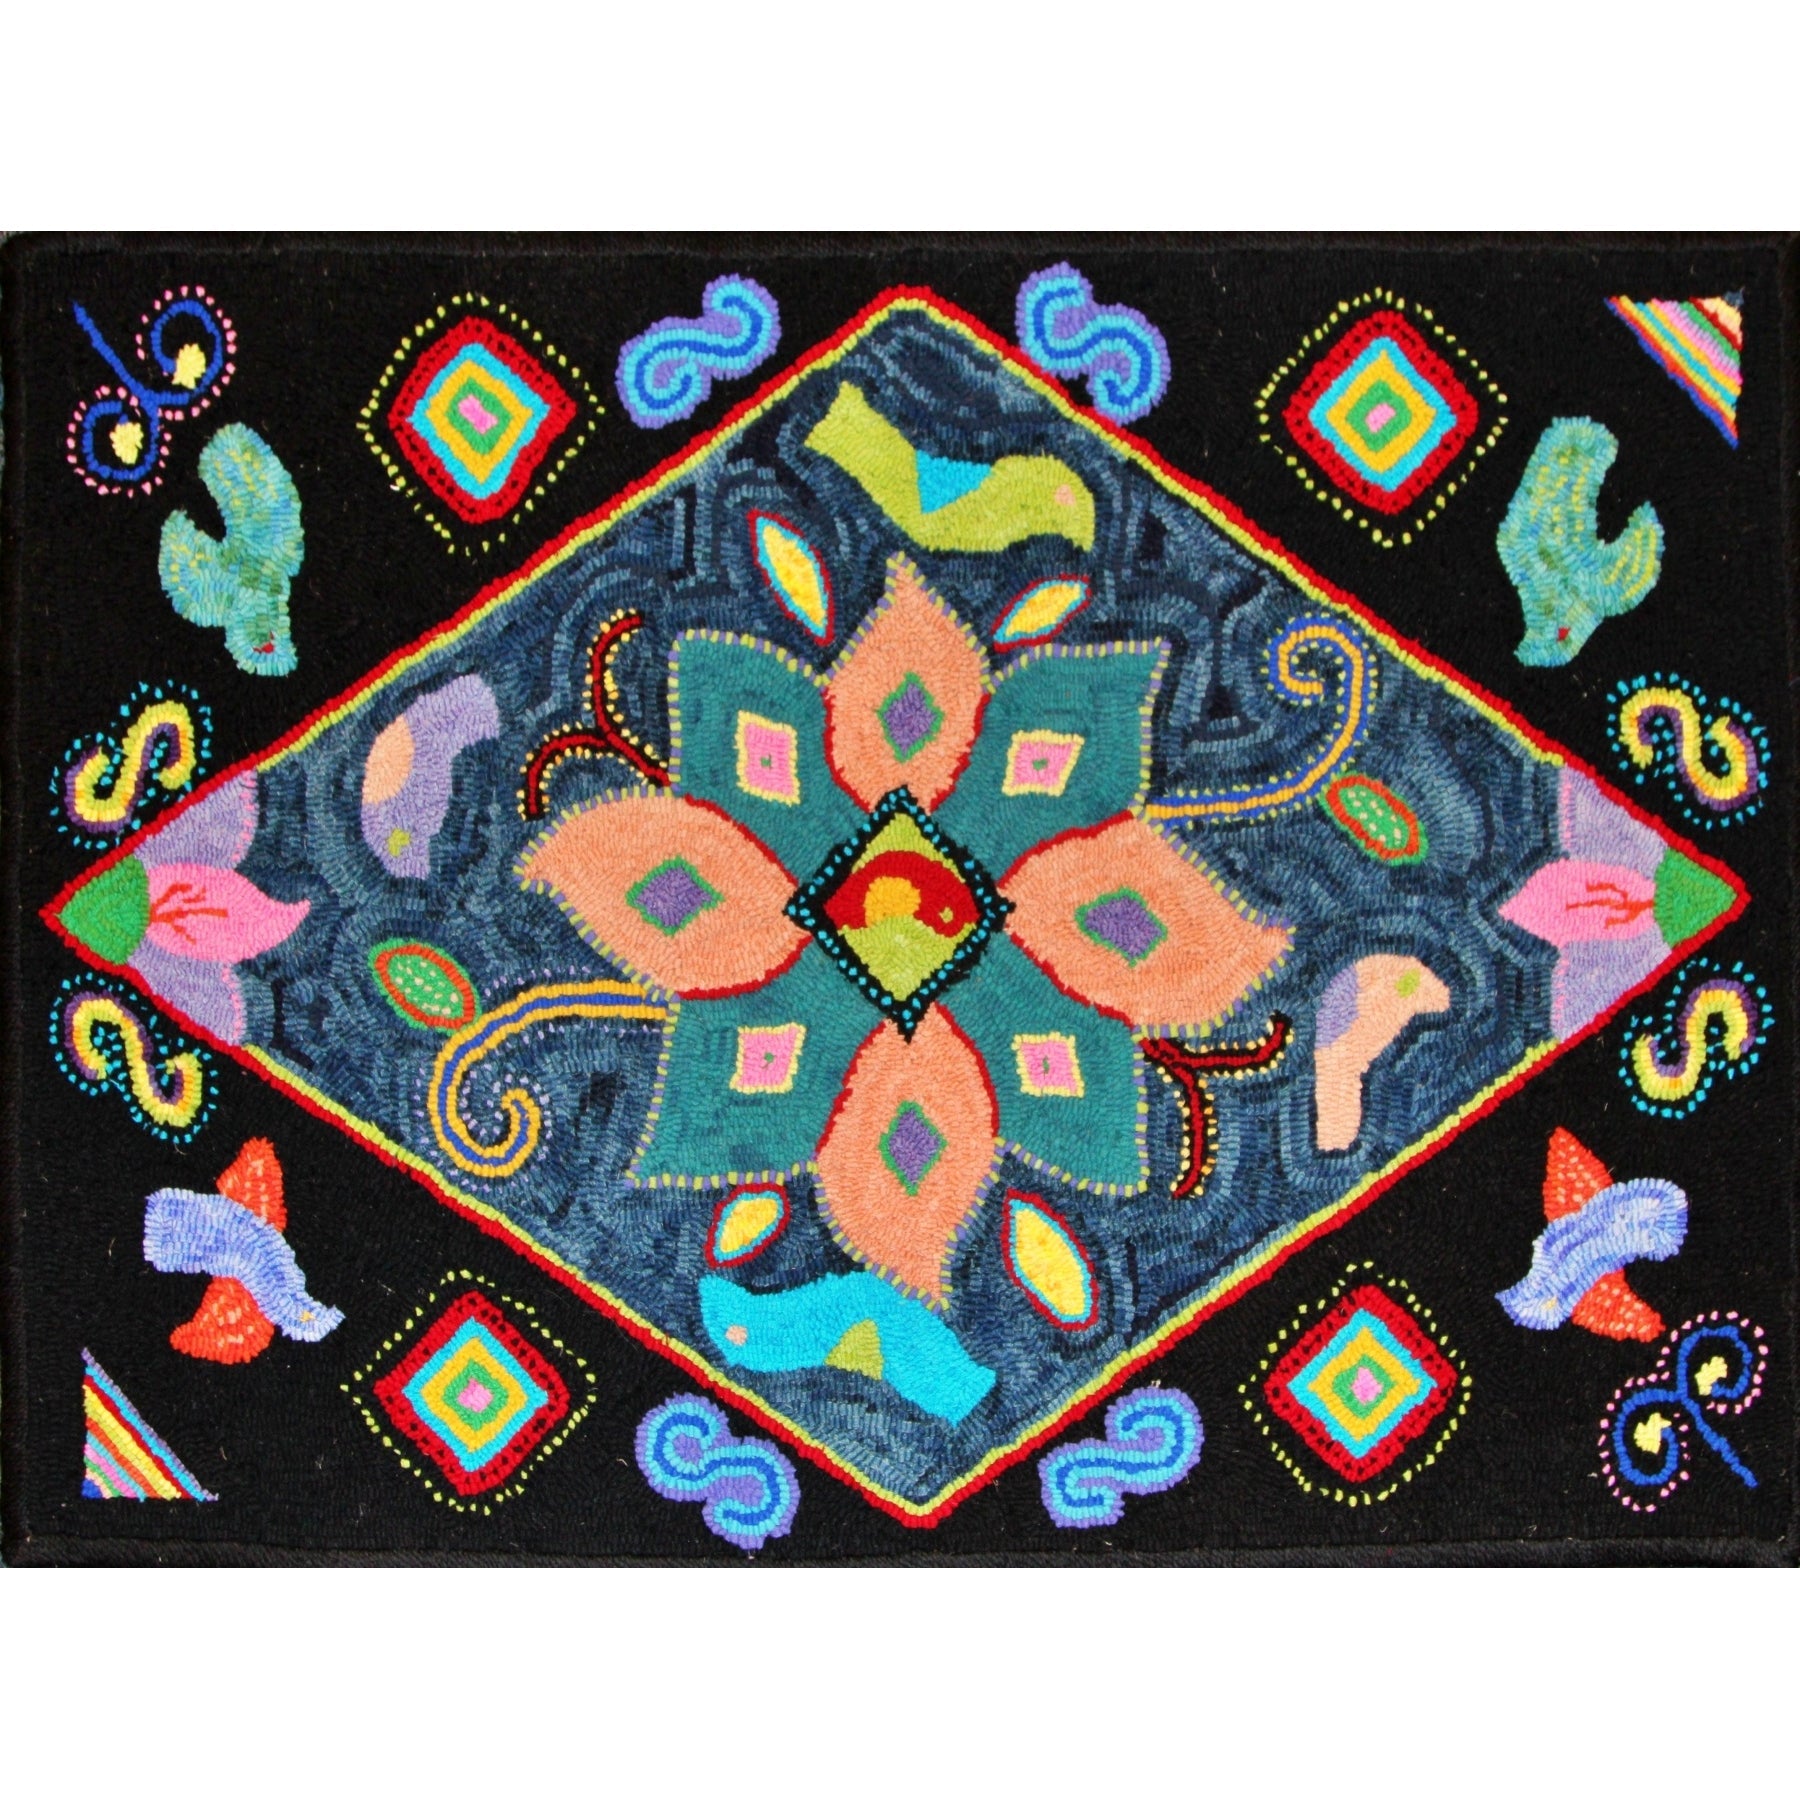 Multicolores Pattern #2, rug hooked by Judy Peluso